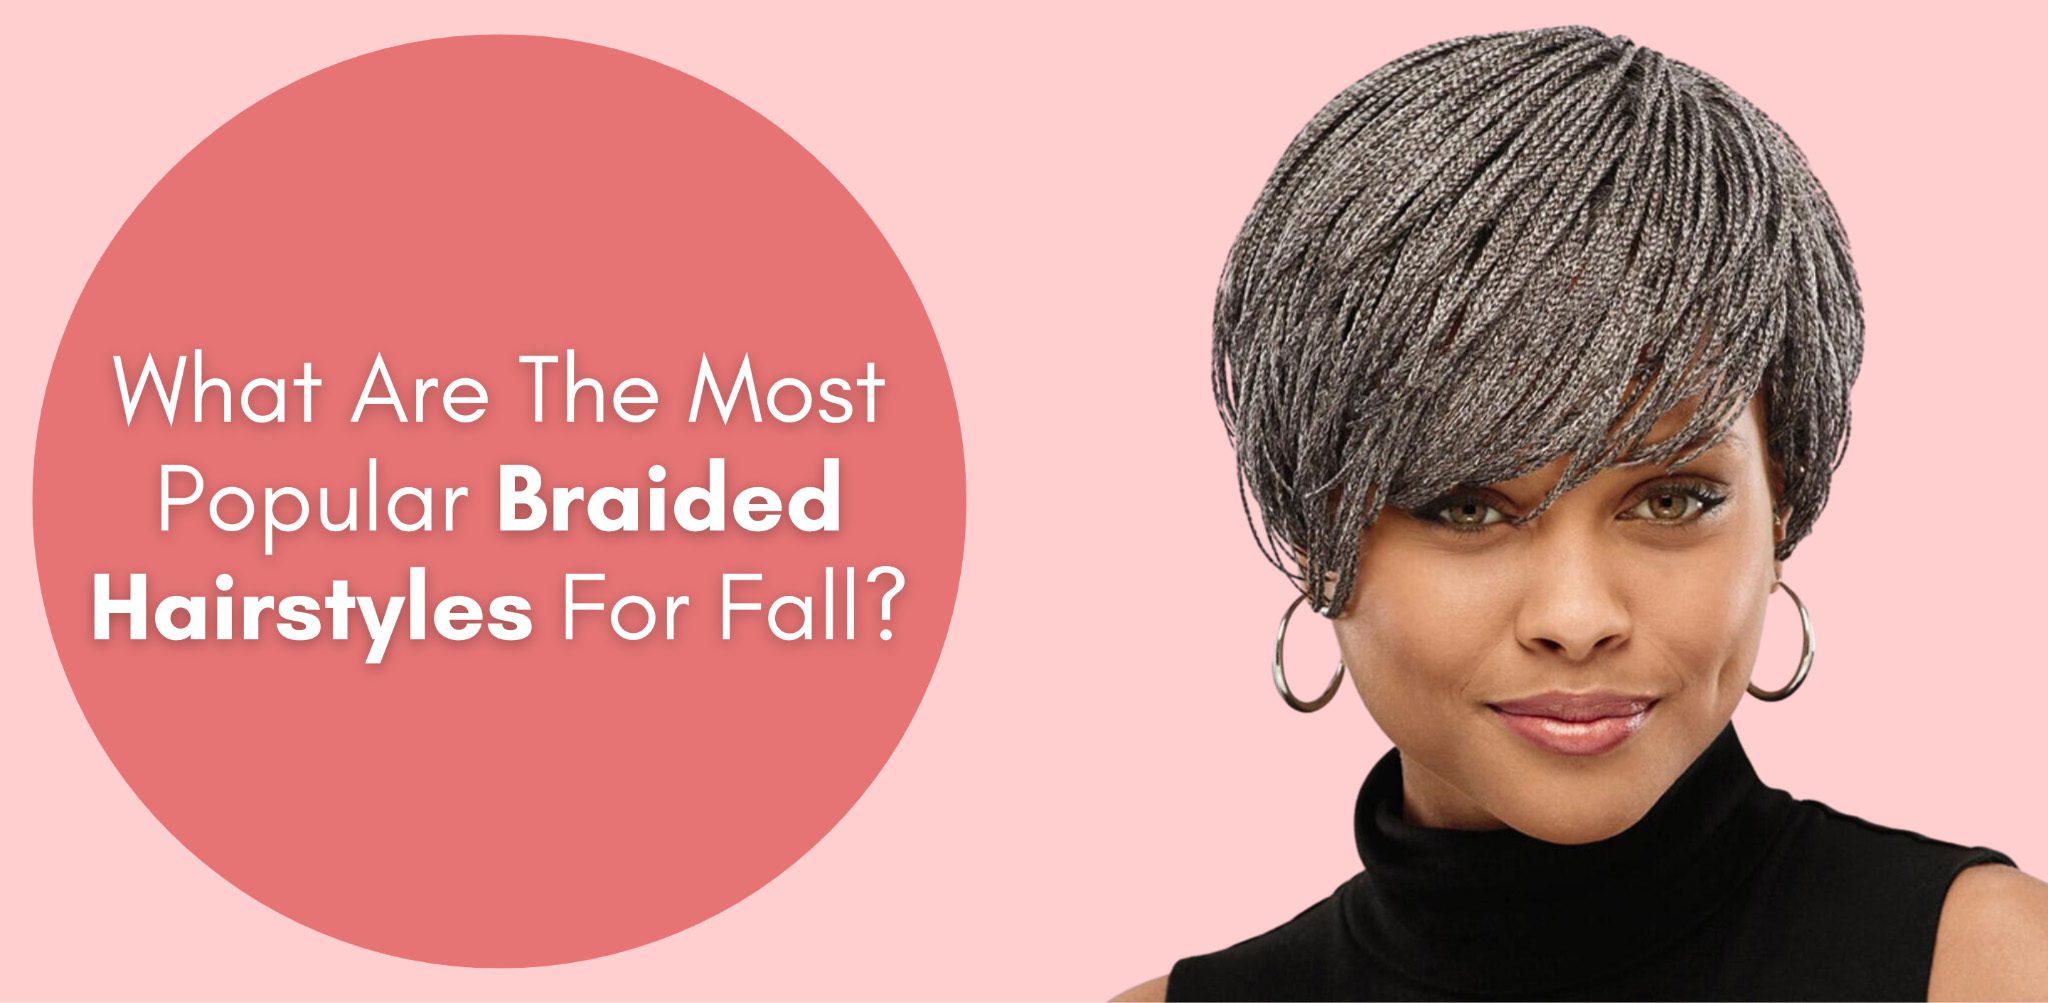 What Are The Most Popular Braided Hairstyles For Fall?